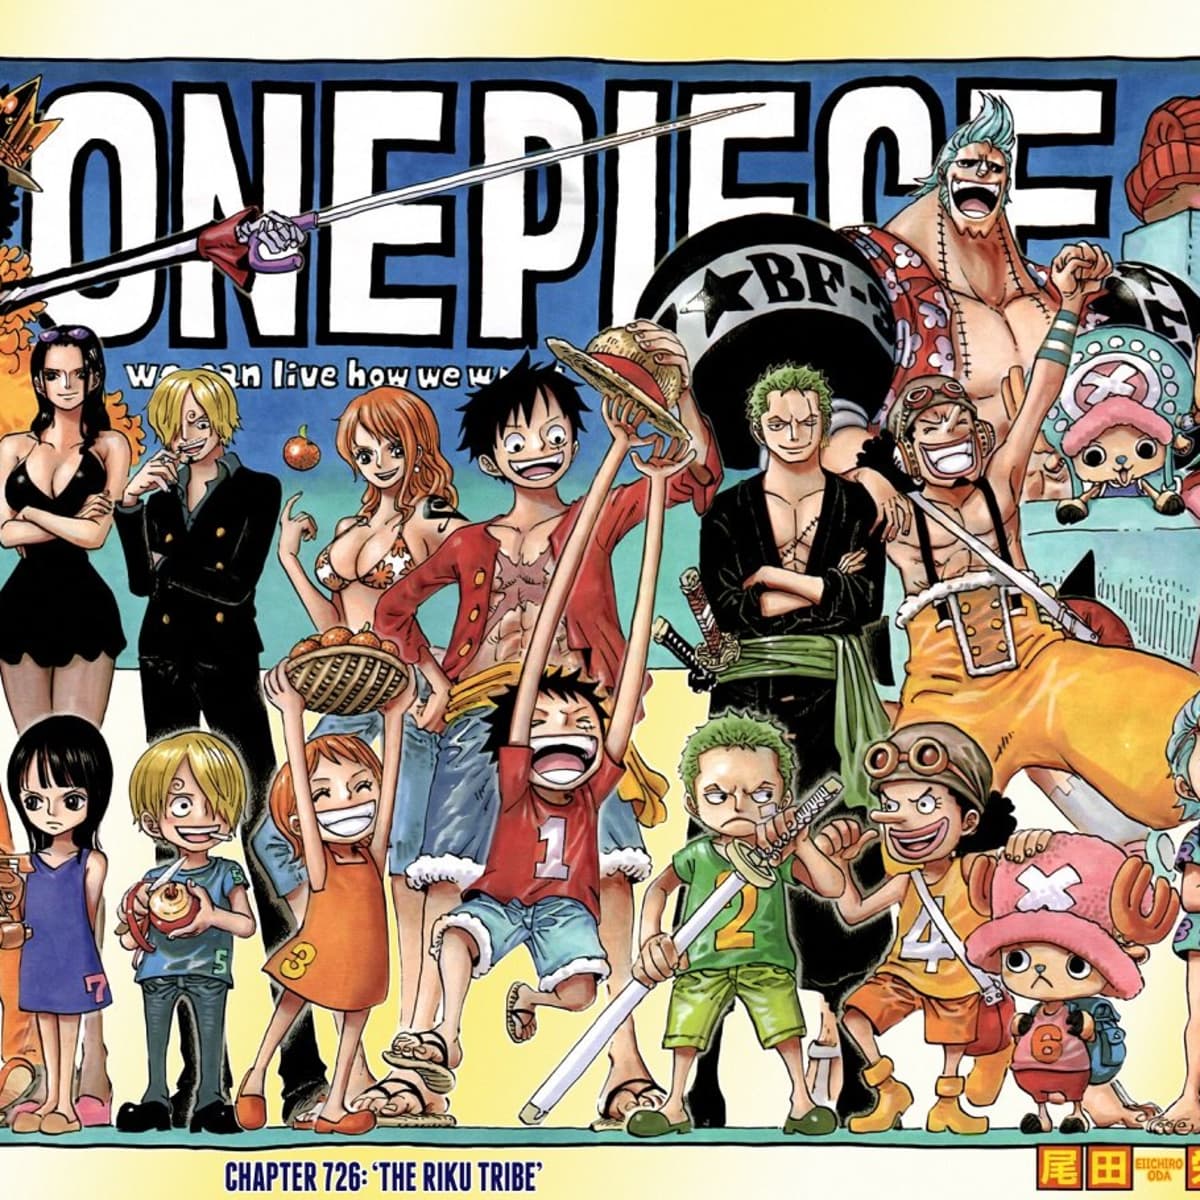 Things The One Piece Anime Does Better Than The Manga